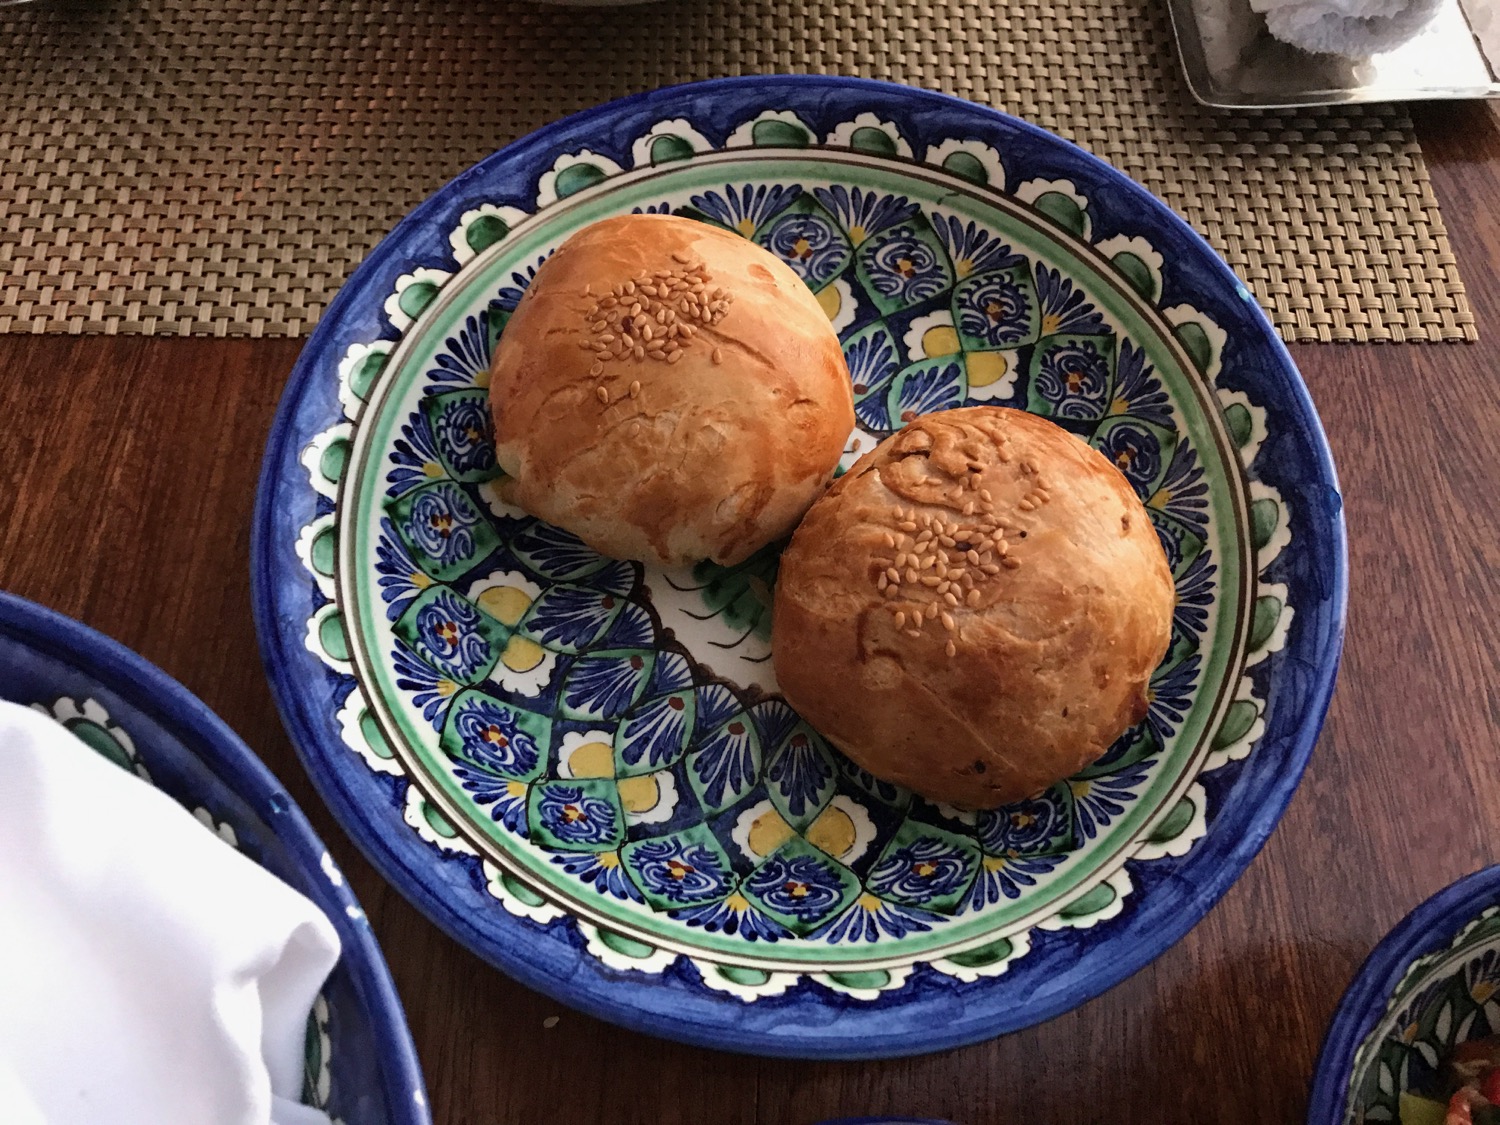 two buns on a plate